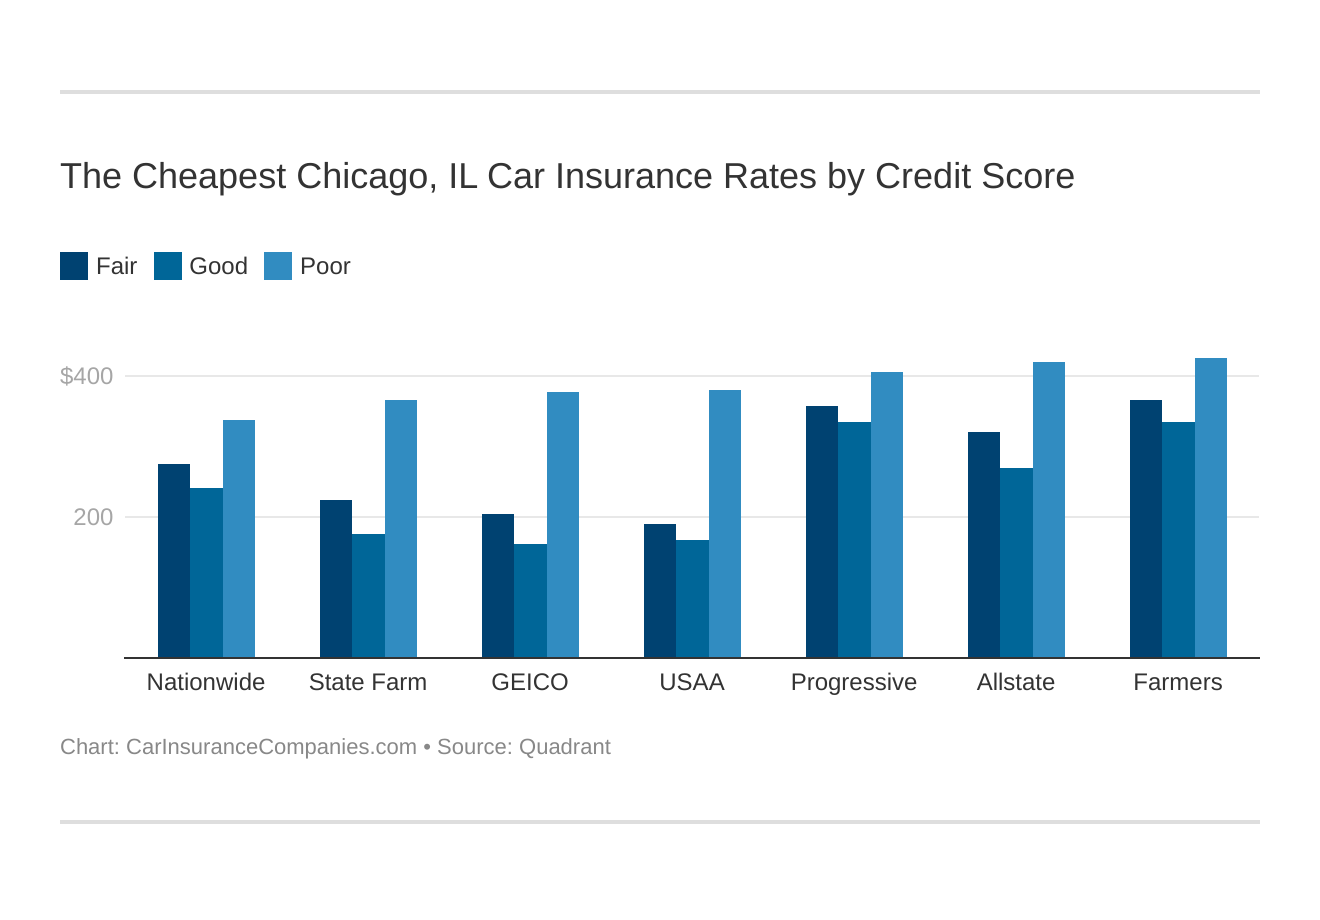 The Cheapest Chicago, IL Car Insurance Rates by Credit Score